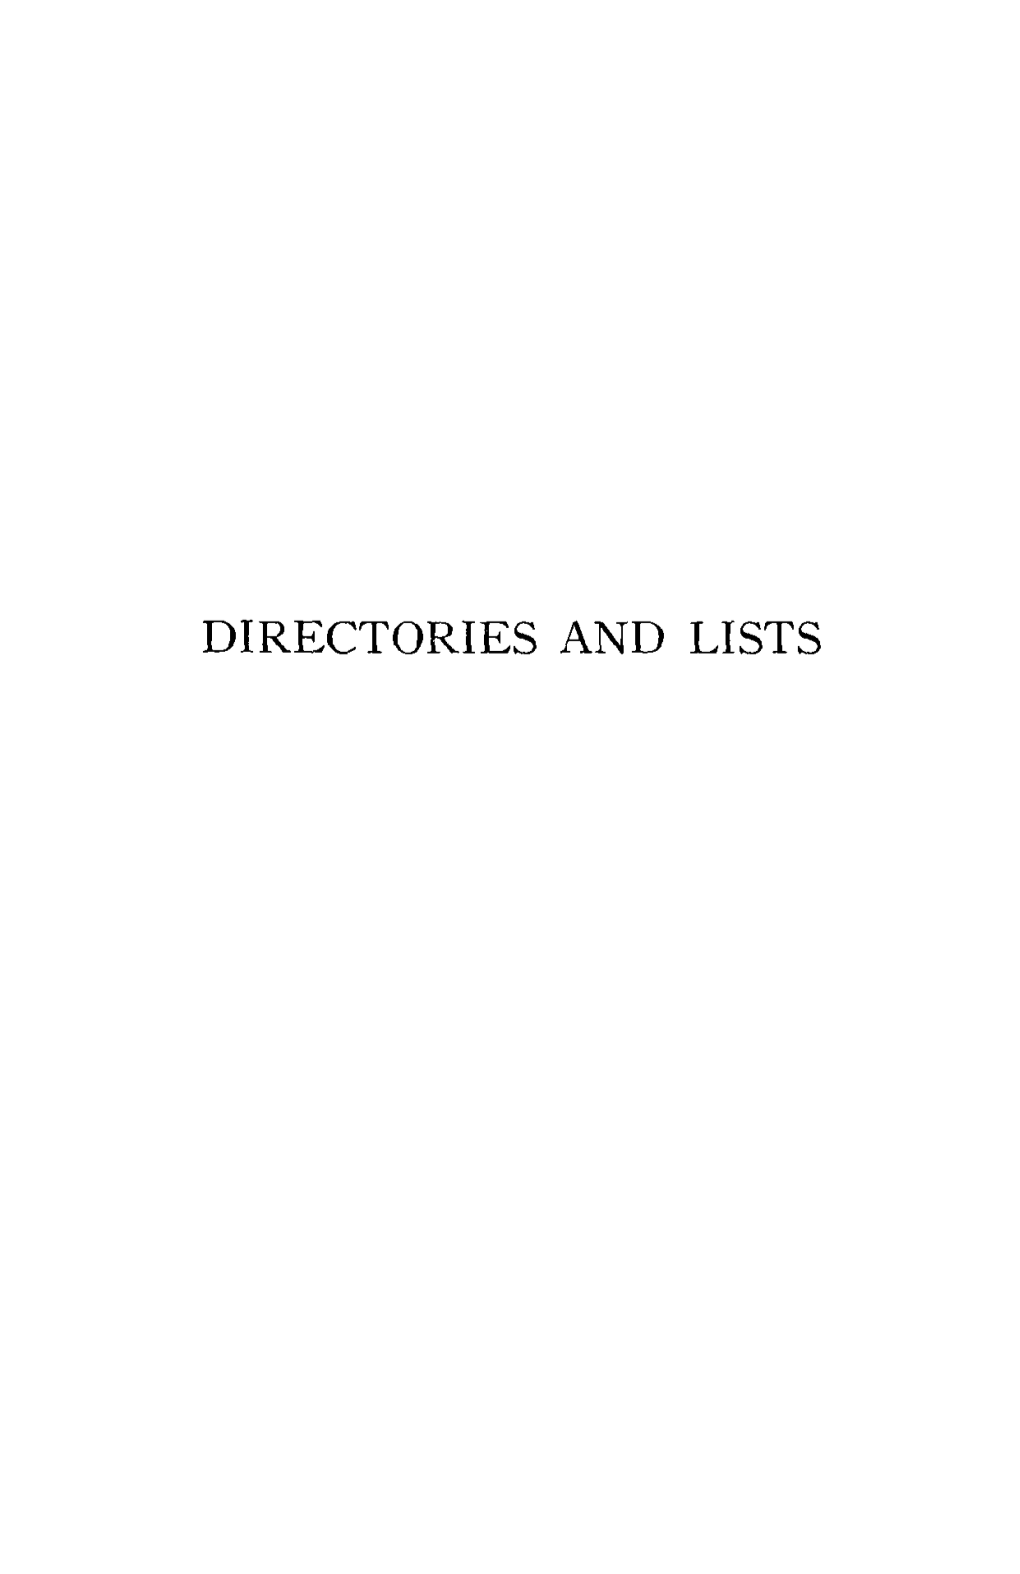 Directories and Lists Jewish National Organizations in the United States*